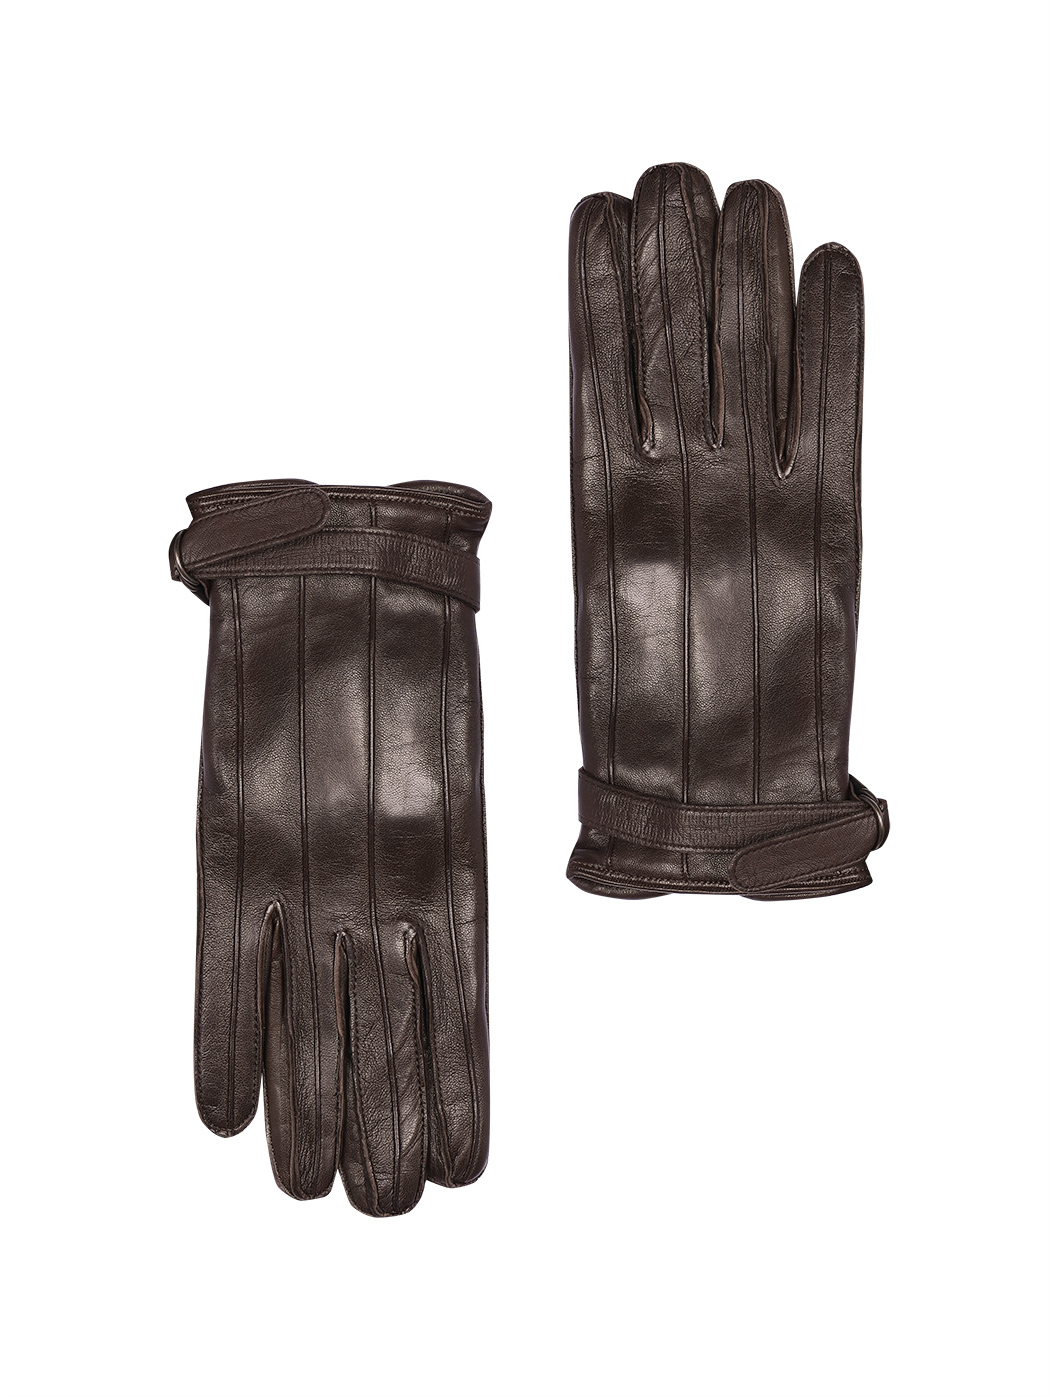 Men's Gloves in Leather and Cashmere Dark brown